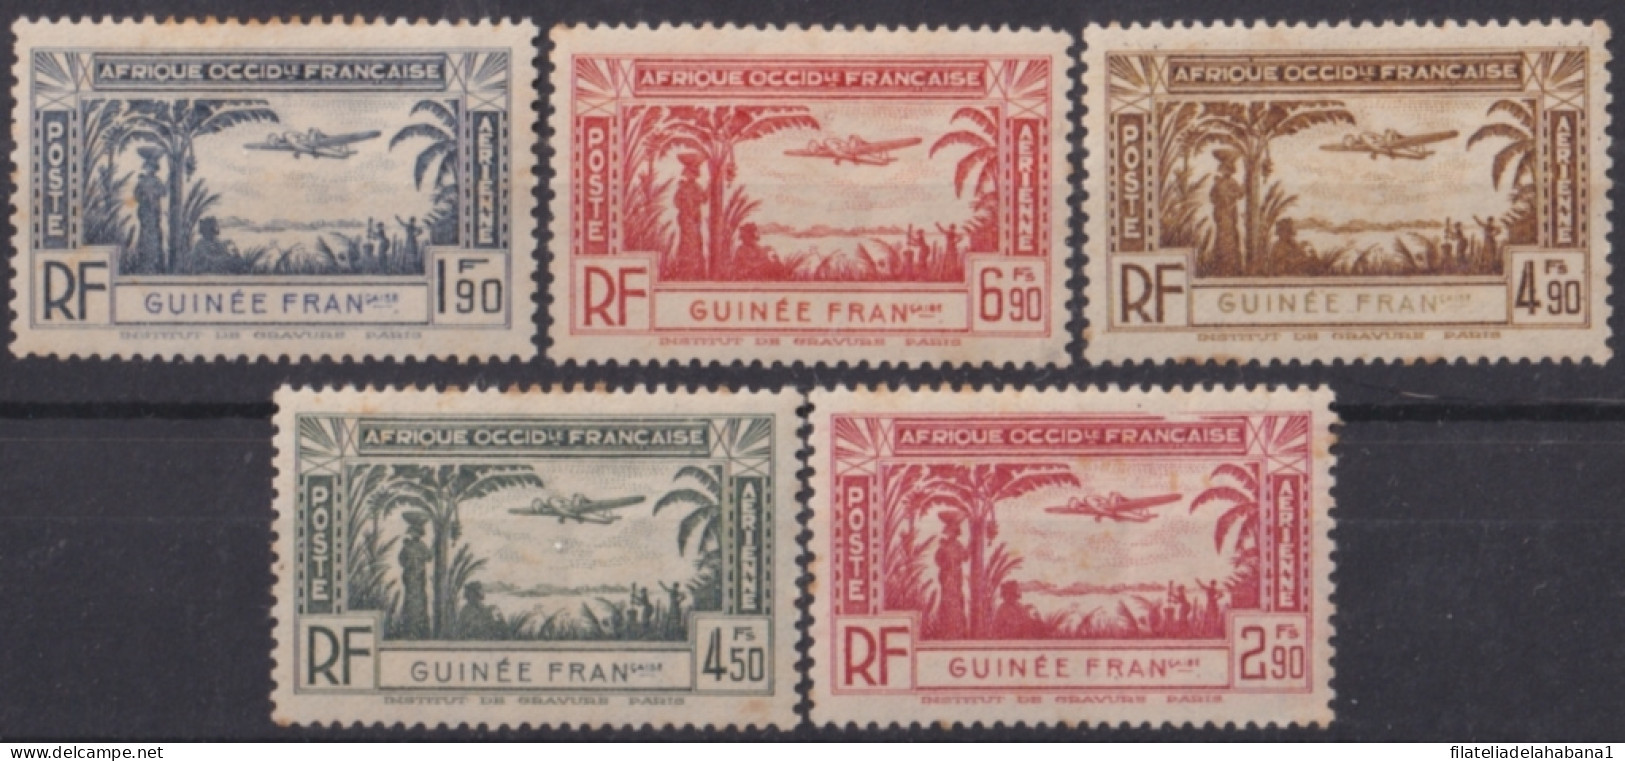 F-EX49282 GUINEA GUINEE FRANCE COLONIES 1940 AIRMAIL AVION AIRPLANE.  - Unused Stamps